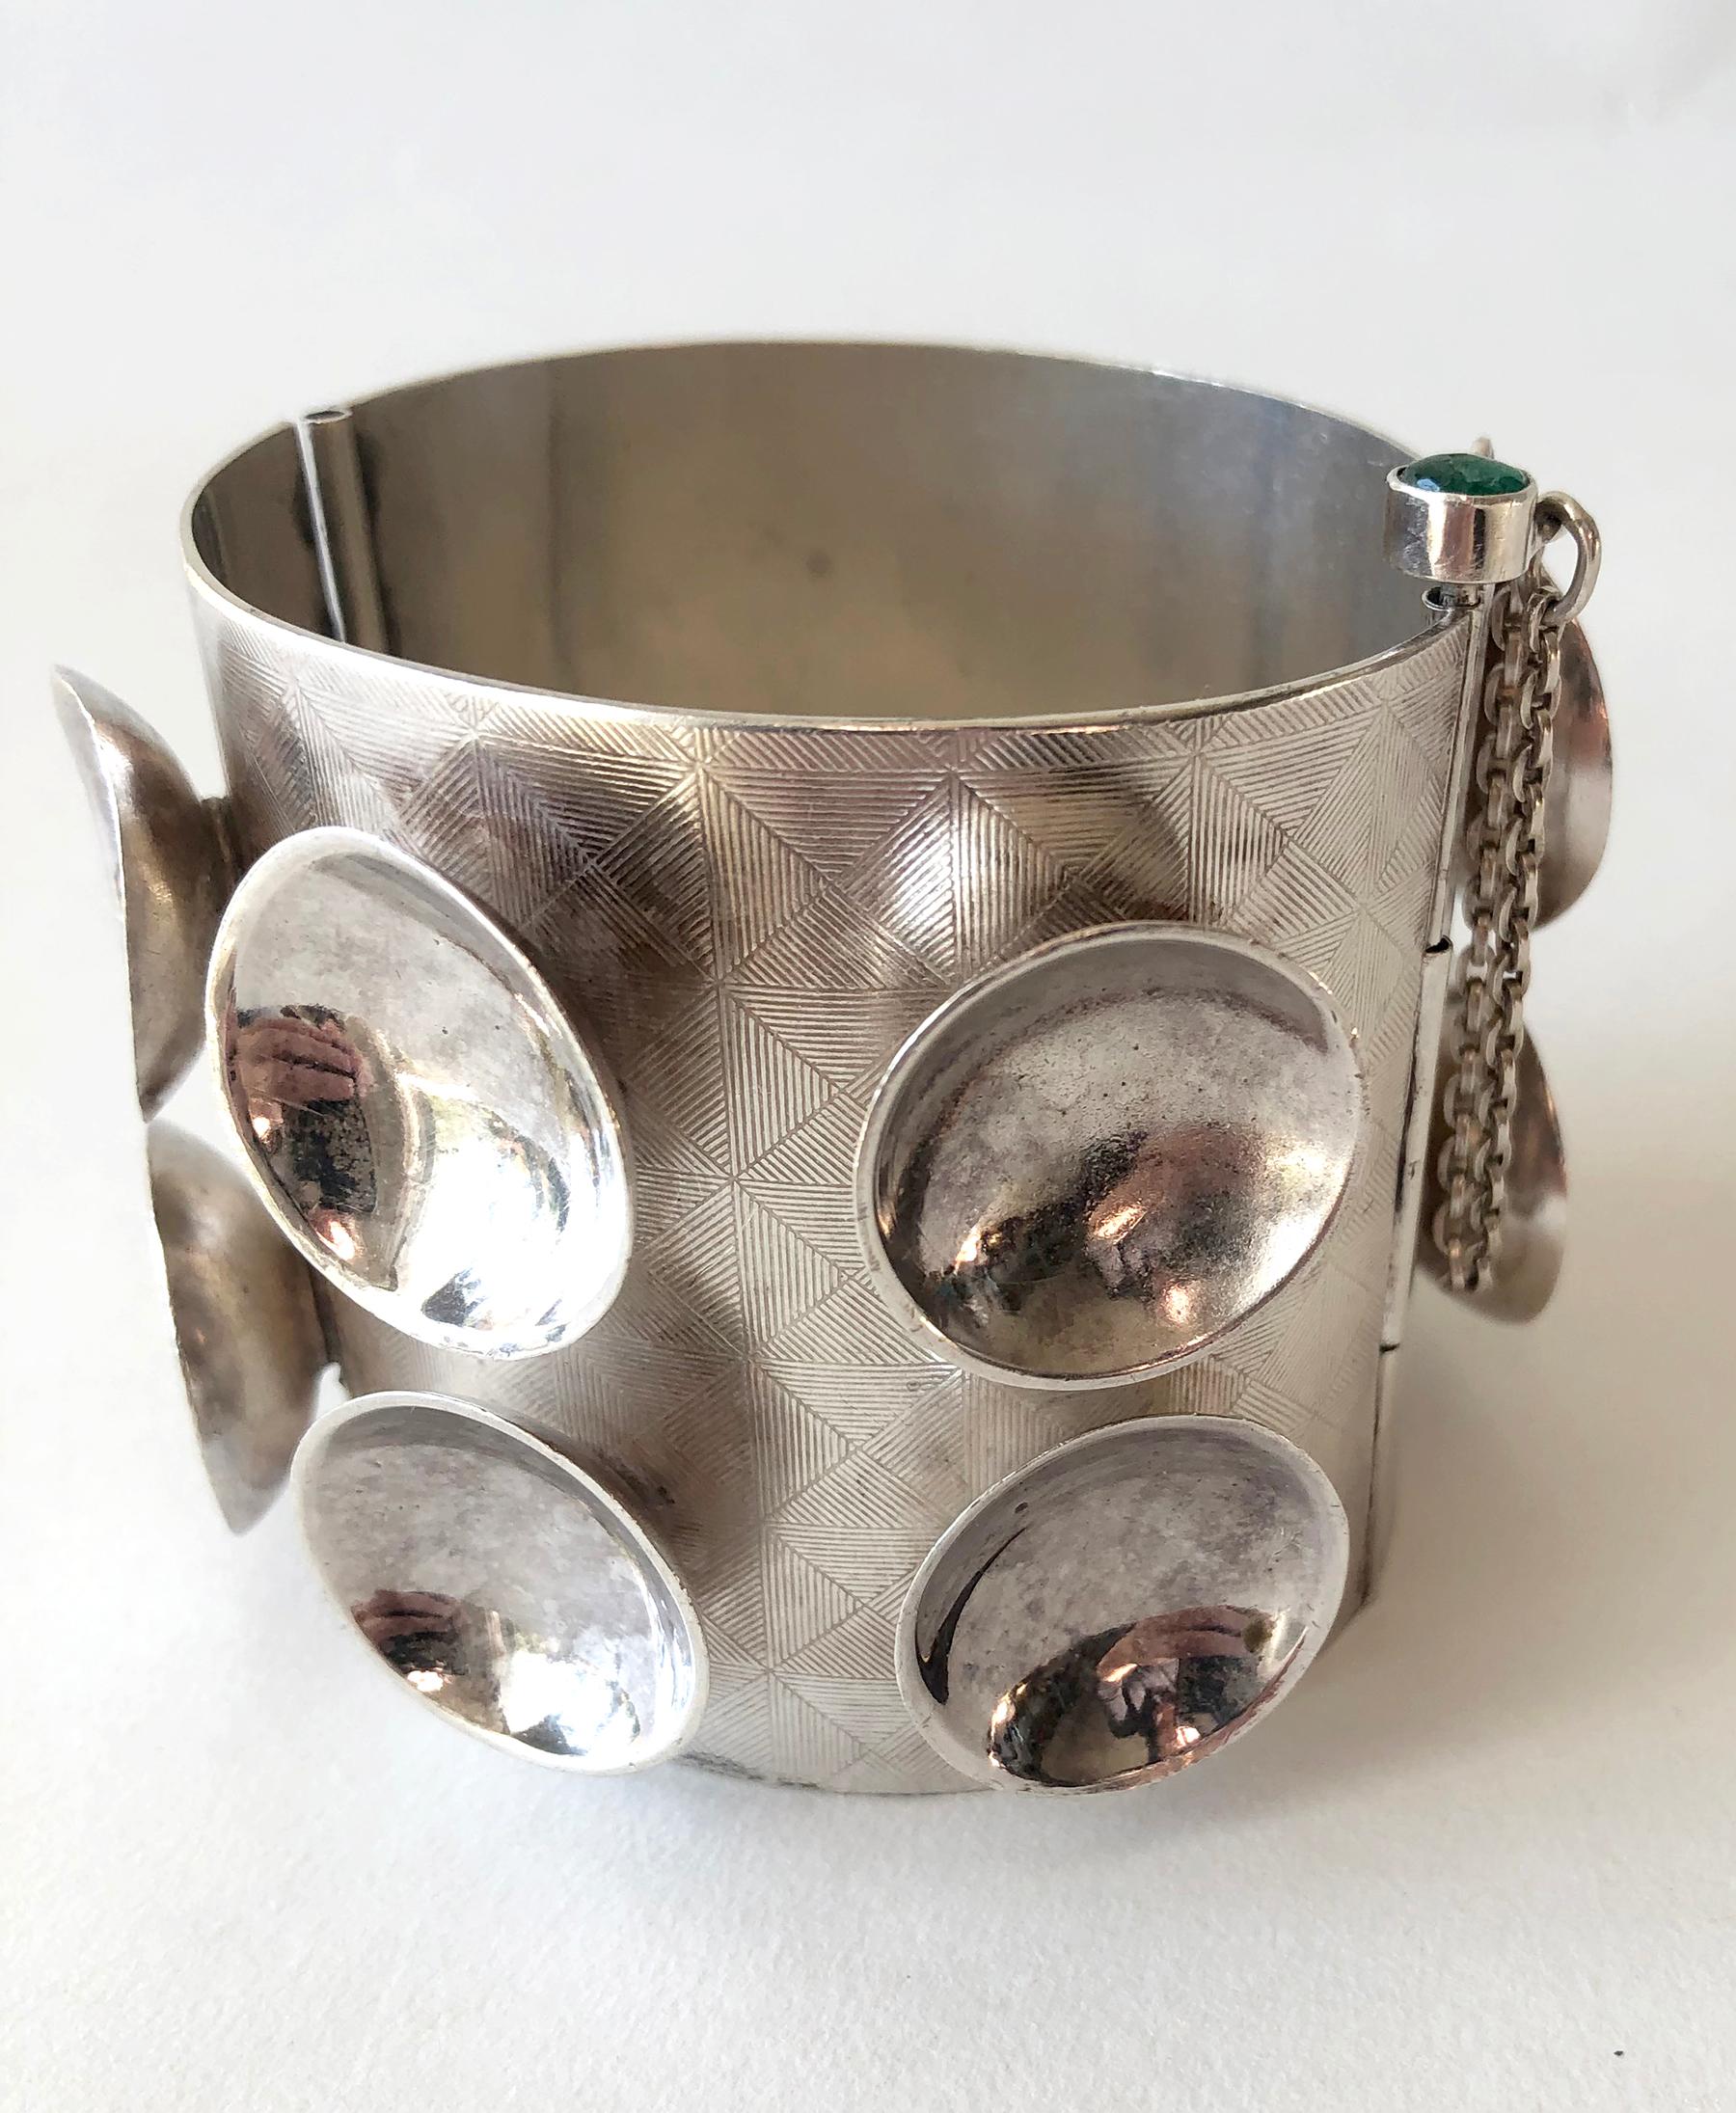 One of a kind sterling silver cuff bracelet decorated with concave cups and incised design by Mary Ann Scherr of North Carolina.  Bracelet fastens with a long pin, which is topped with an emerald cabochon.  Cuff is 2.25